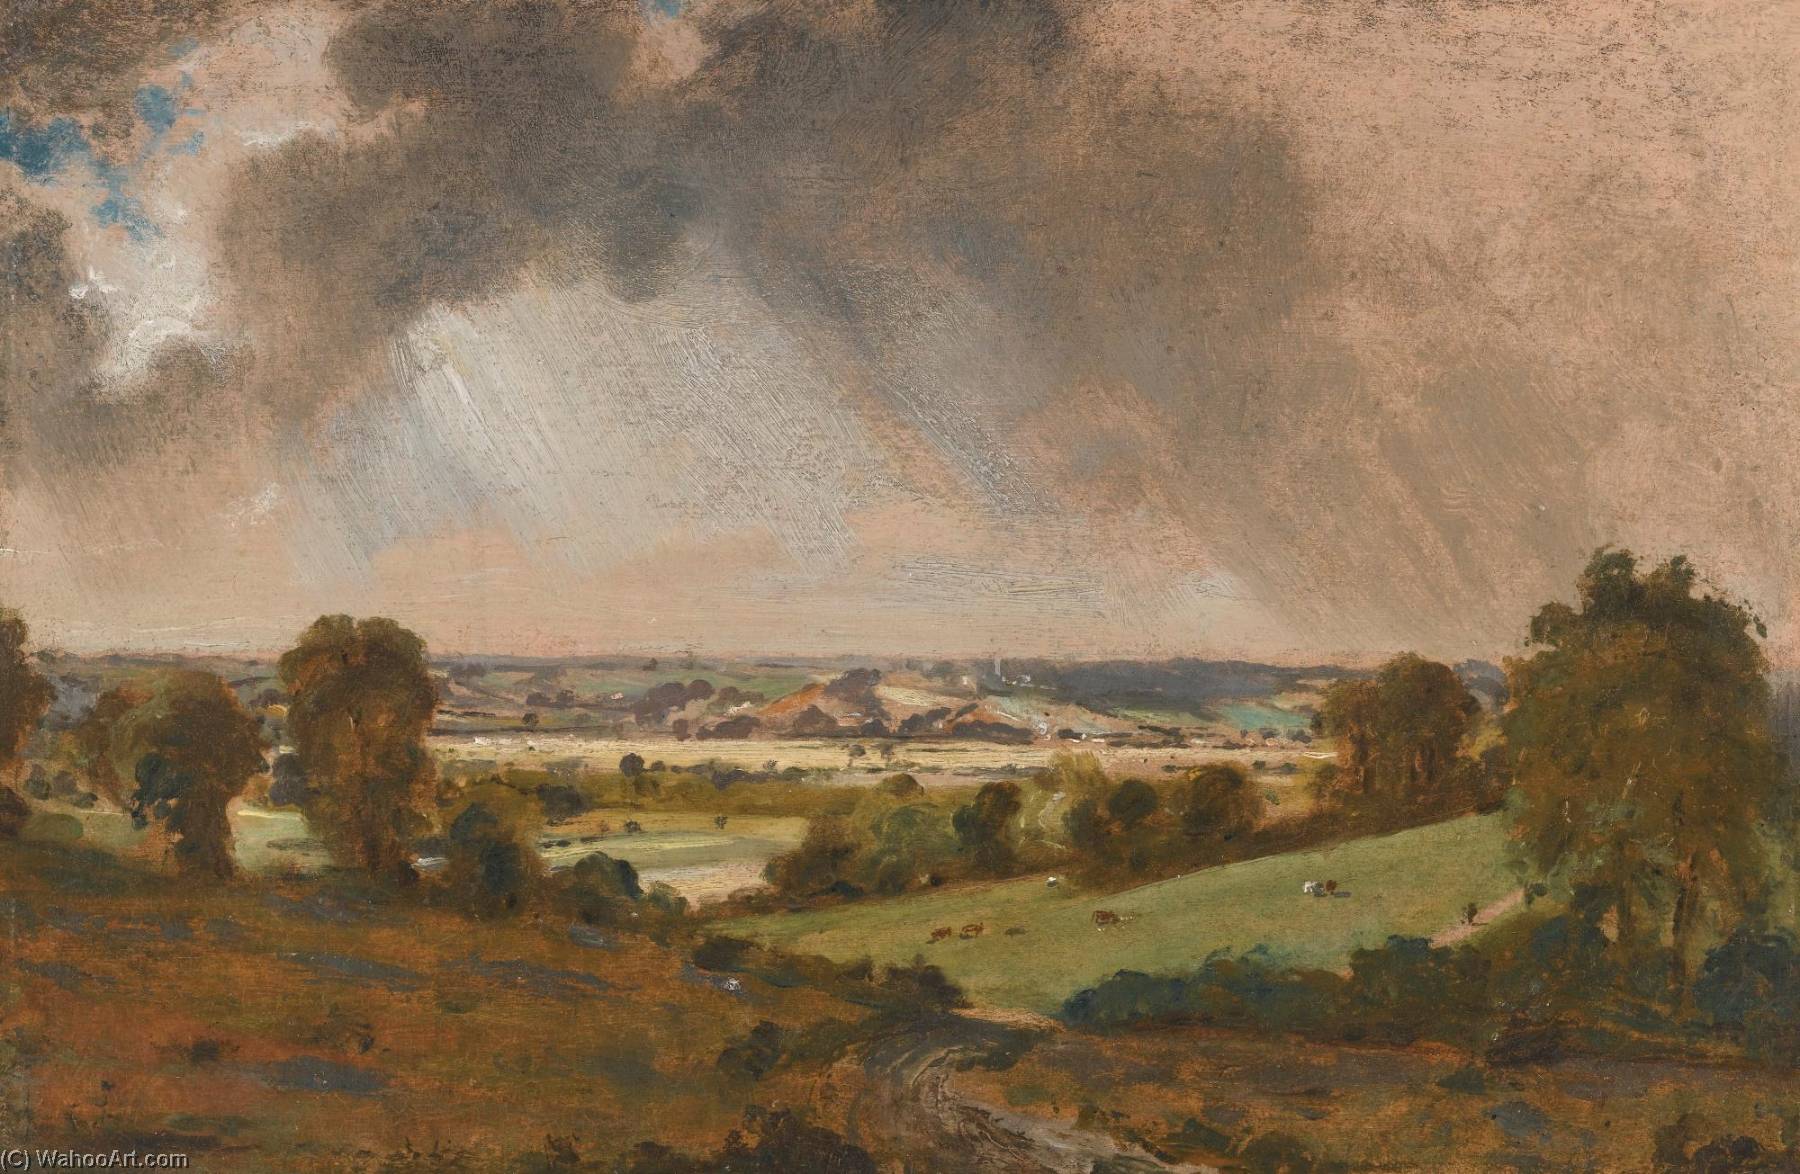 WikiOO.org - Enciclopédia das Belas Artes - Pintura, Arte por John Constable - Dedham Vale, with a view to Langham church from the fields just east of Vale Farm, East Bergholt